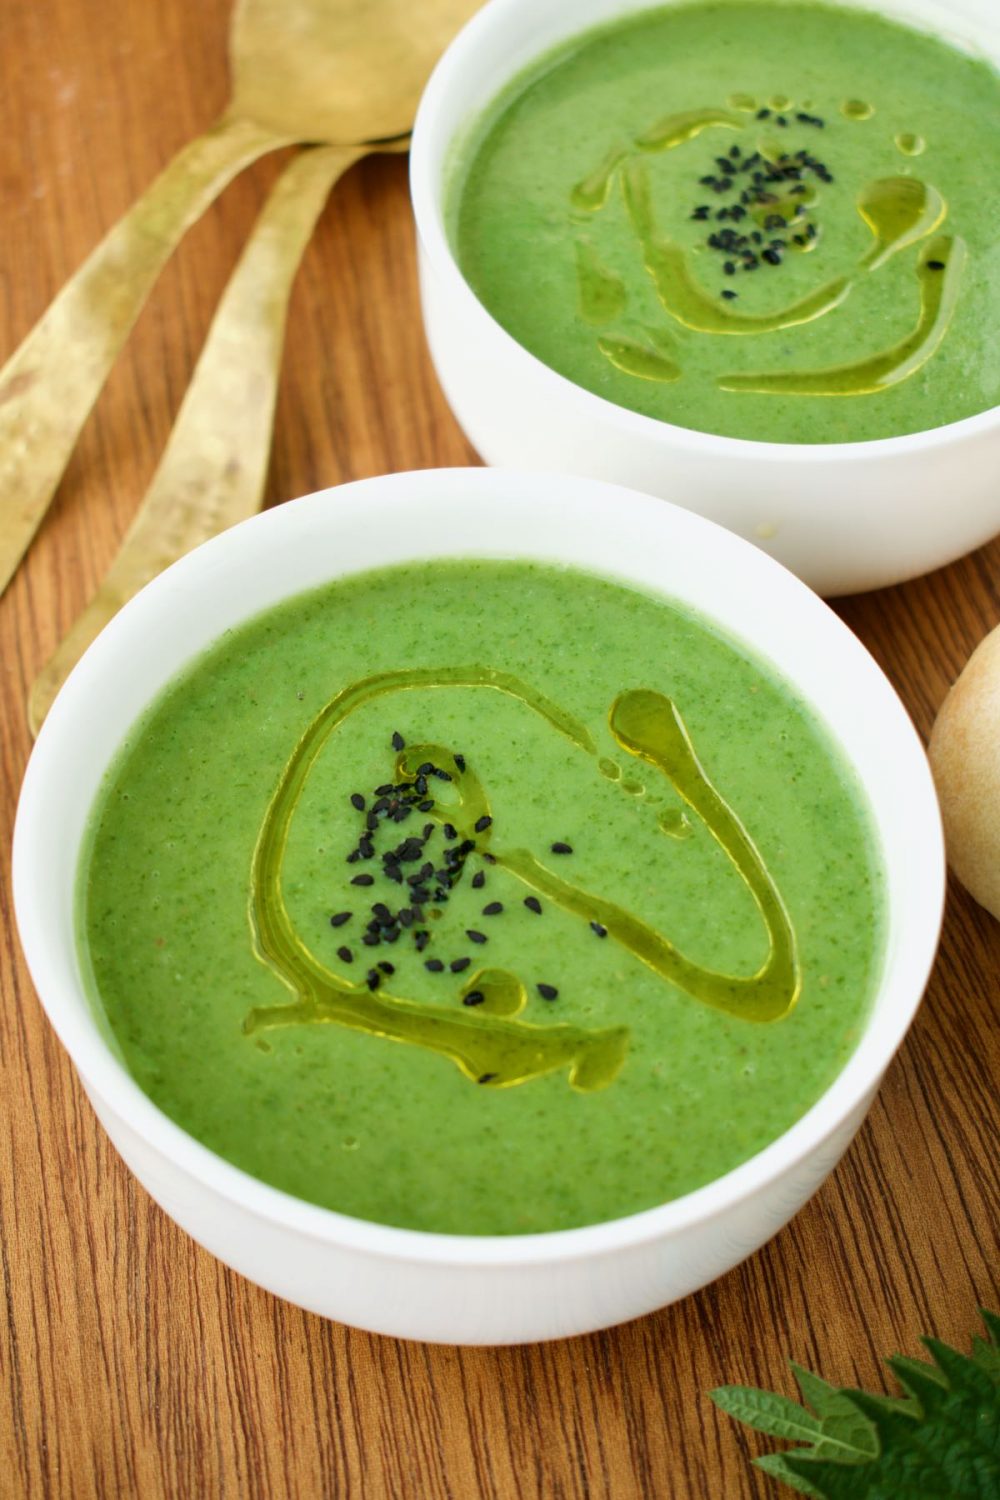 Two white bowls containing bright green soup